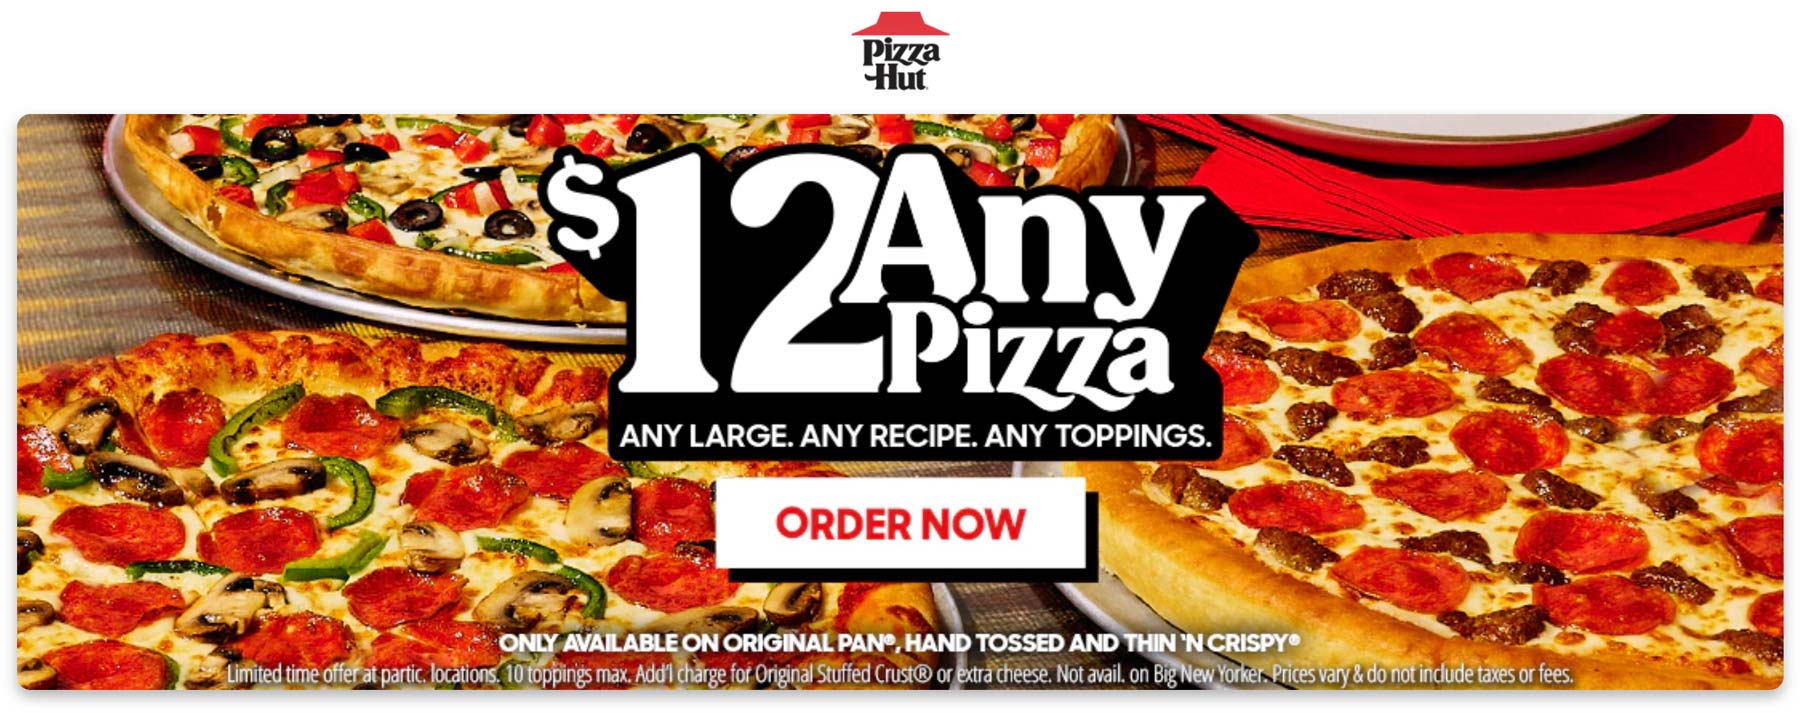 Pizza Hut restaurants Coupon  10-toppings large pizza = $12 at Pizza Hut #pizzahut 